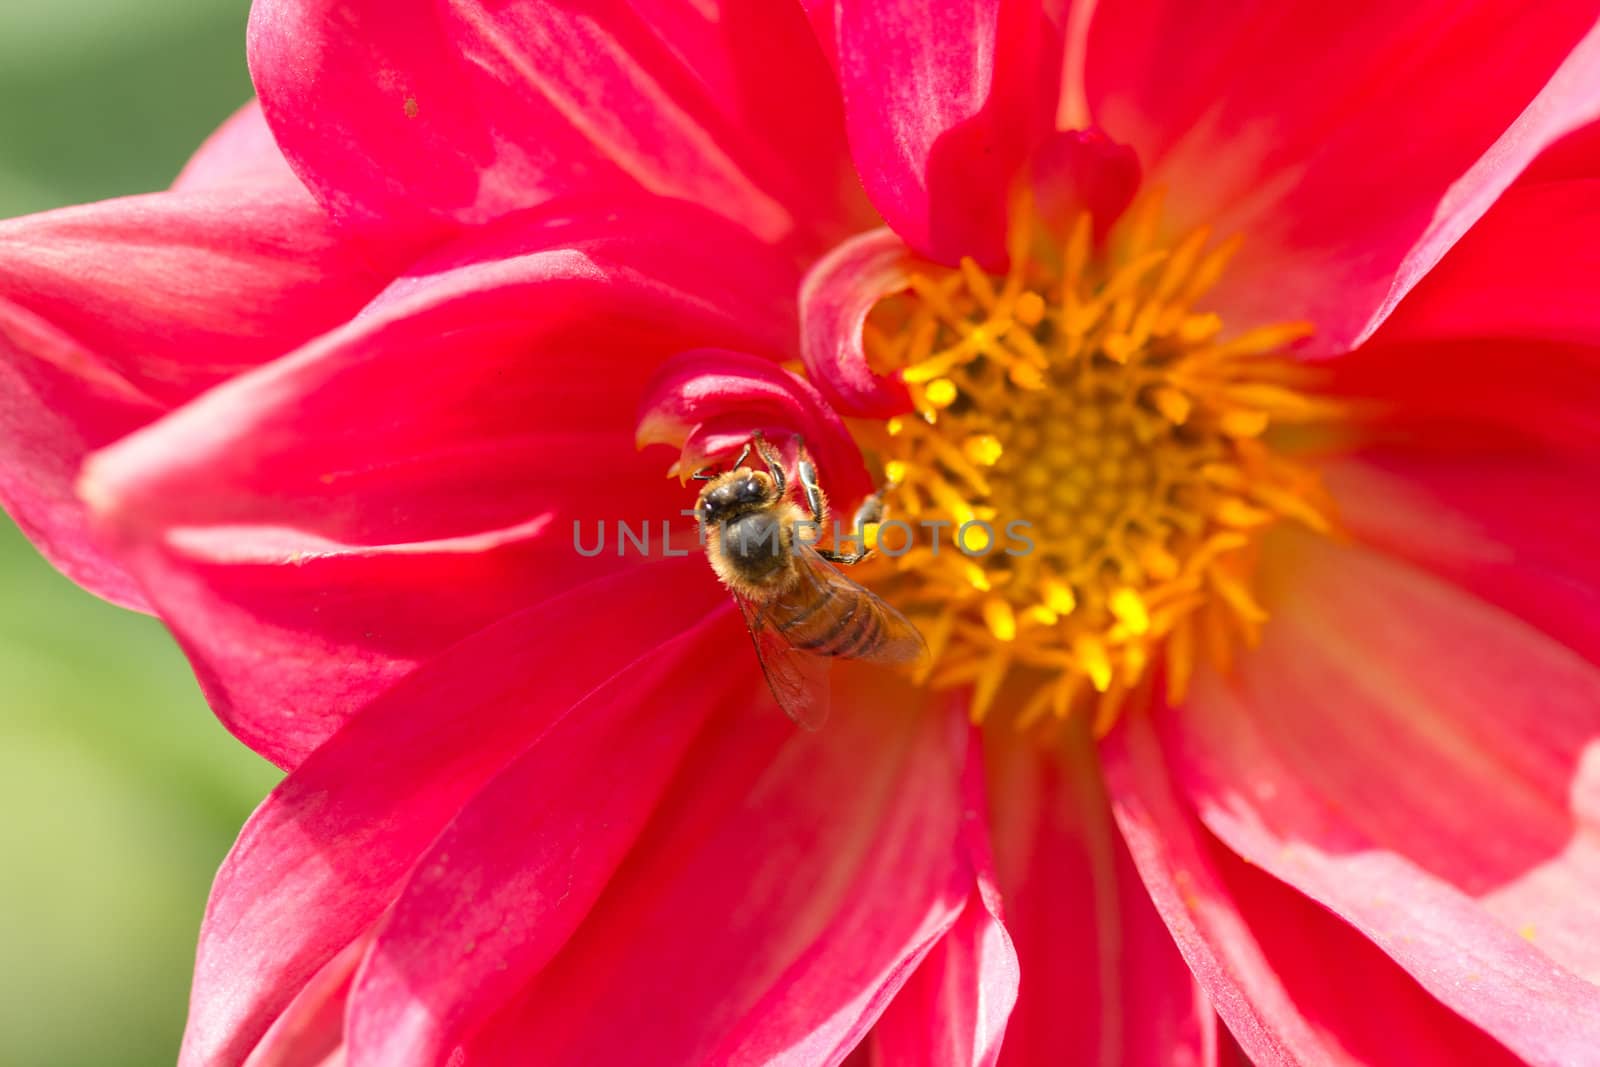 Honey bee pollinating a flower by derejeb